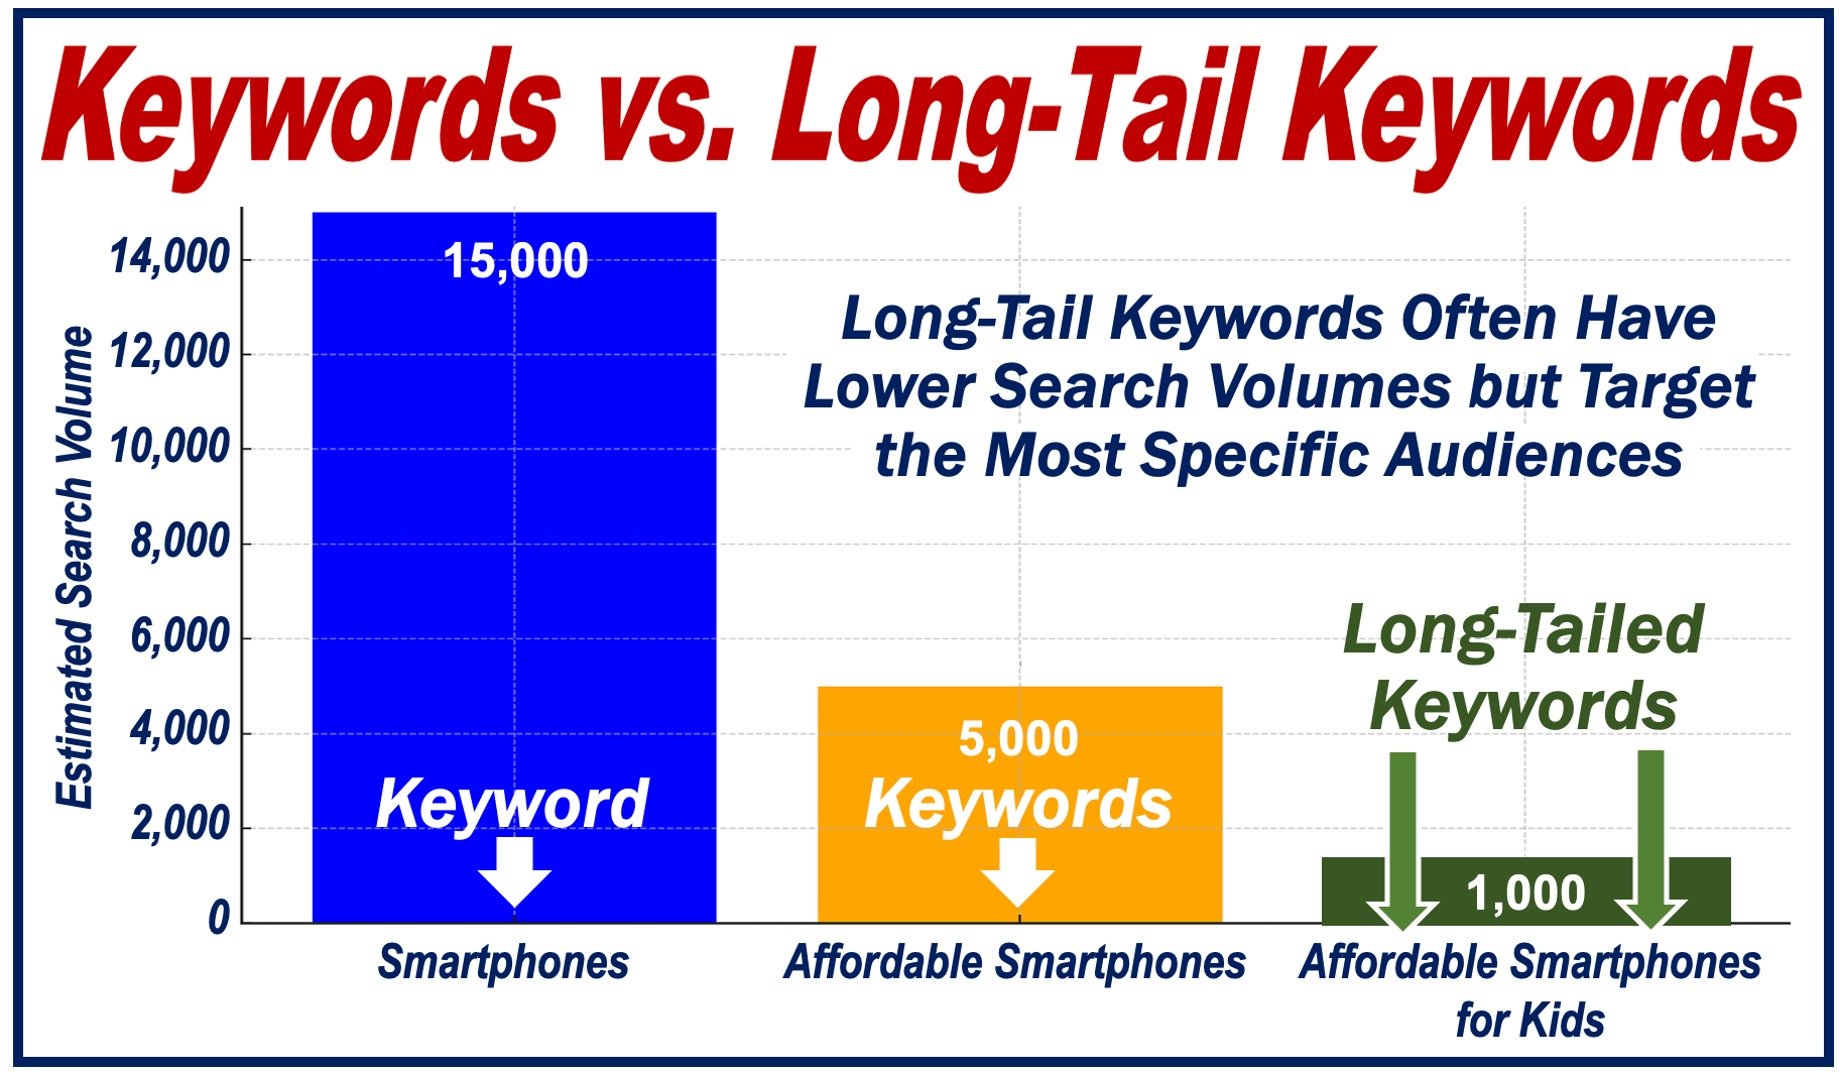 Image contrasting Keywords with Long-Tail Keywords.